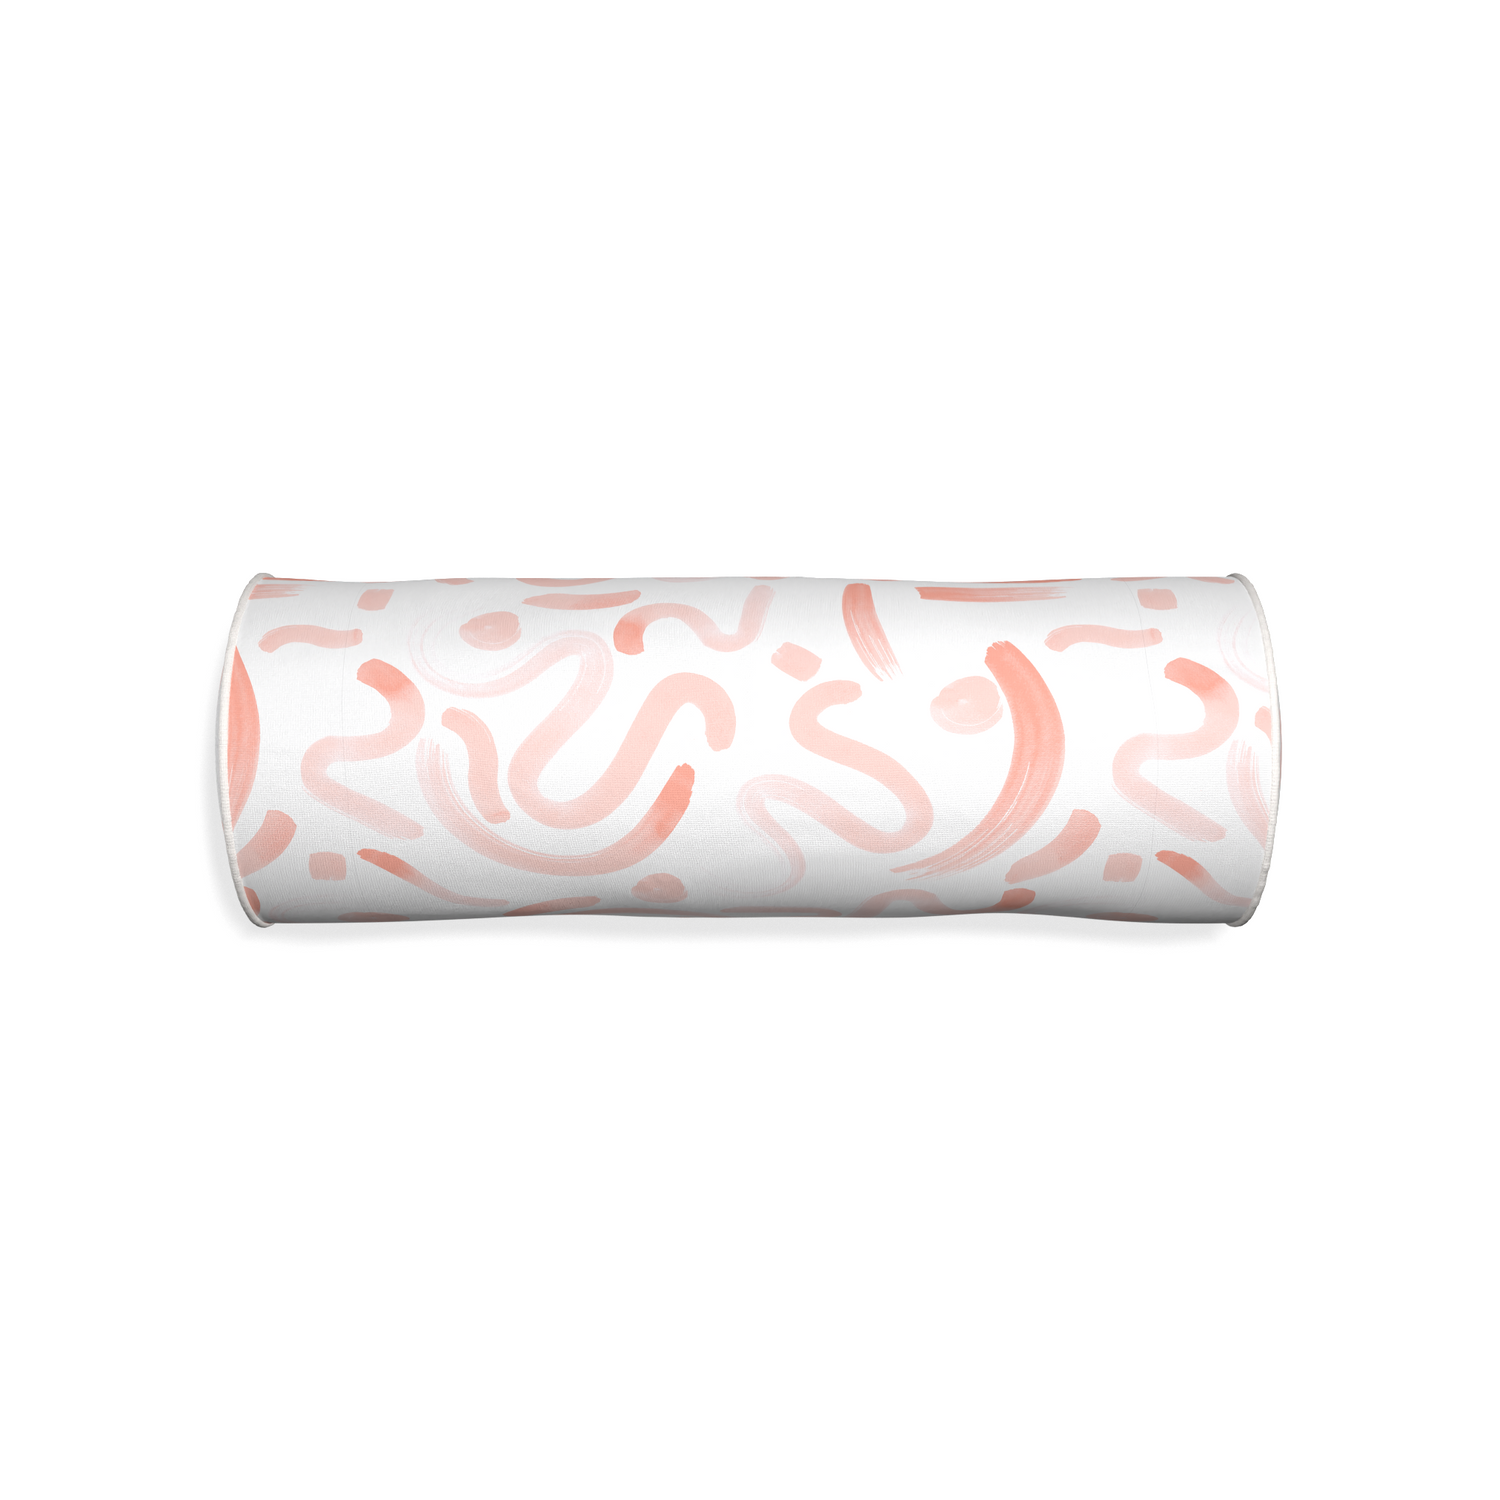 Bolster hockney pink custom pillow with snow piping on white background